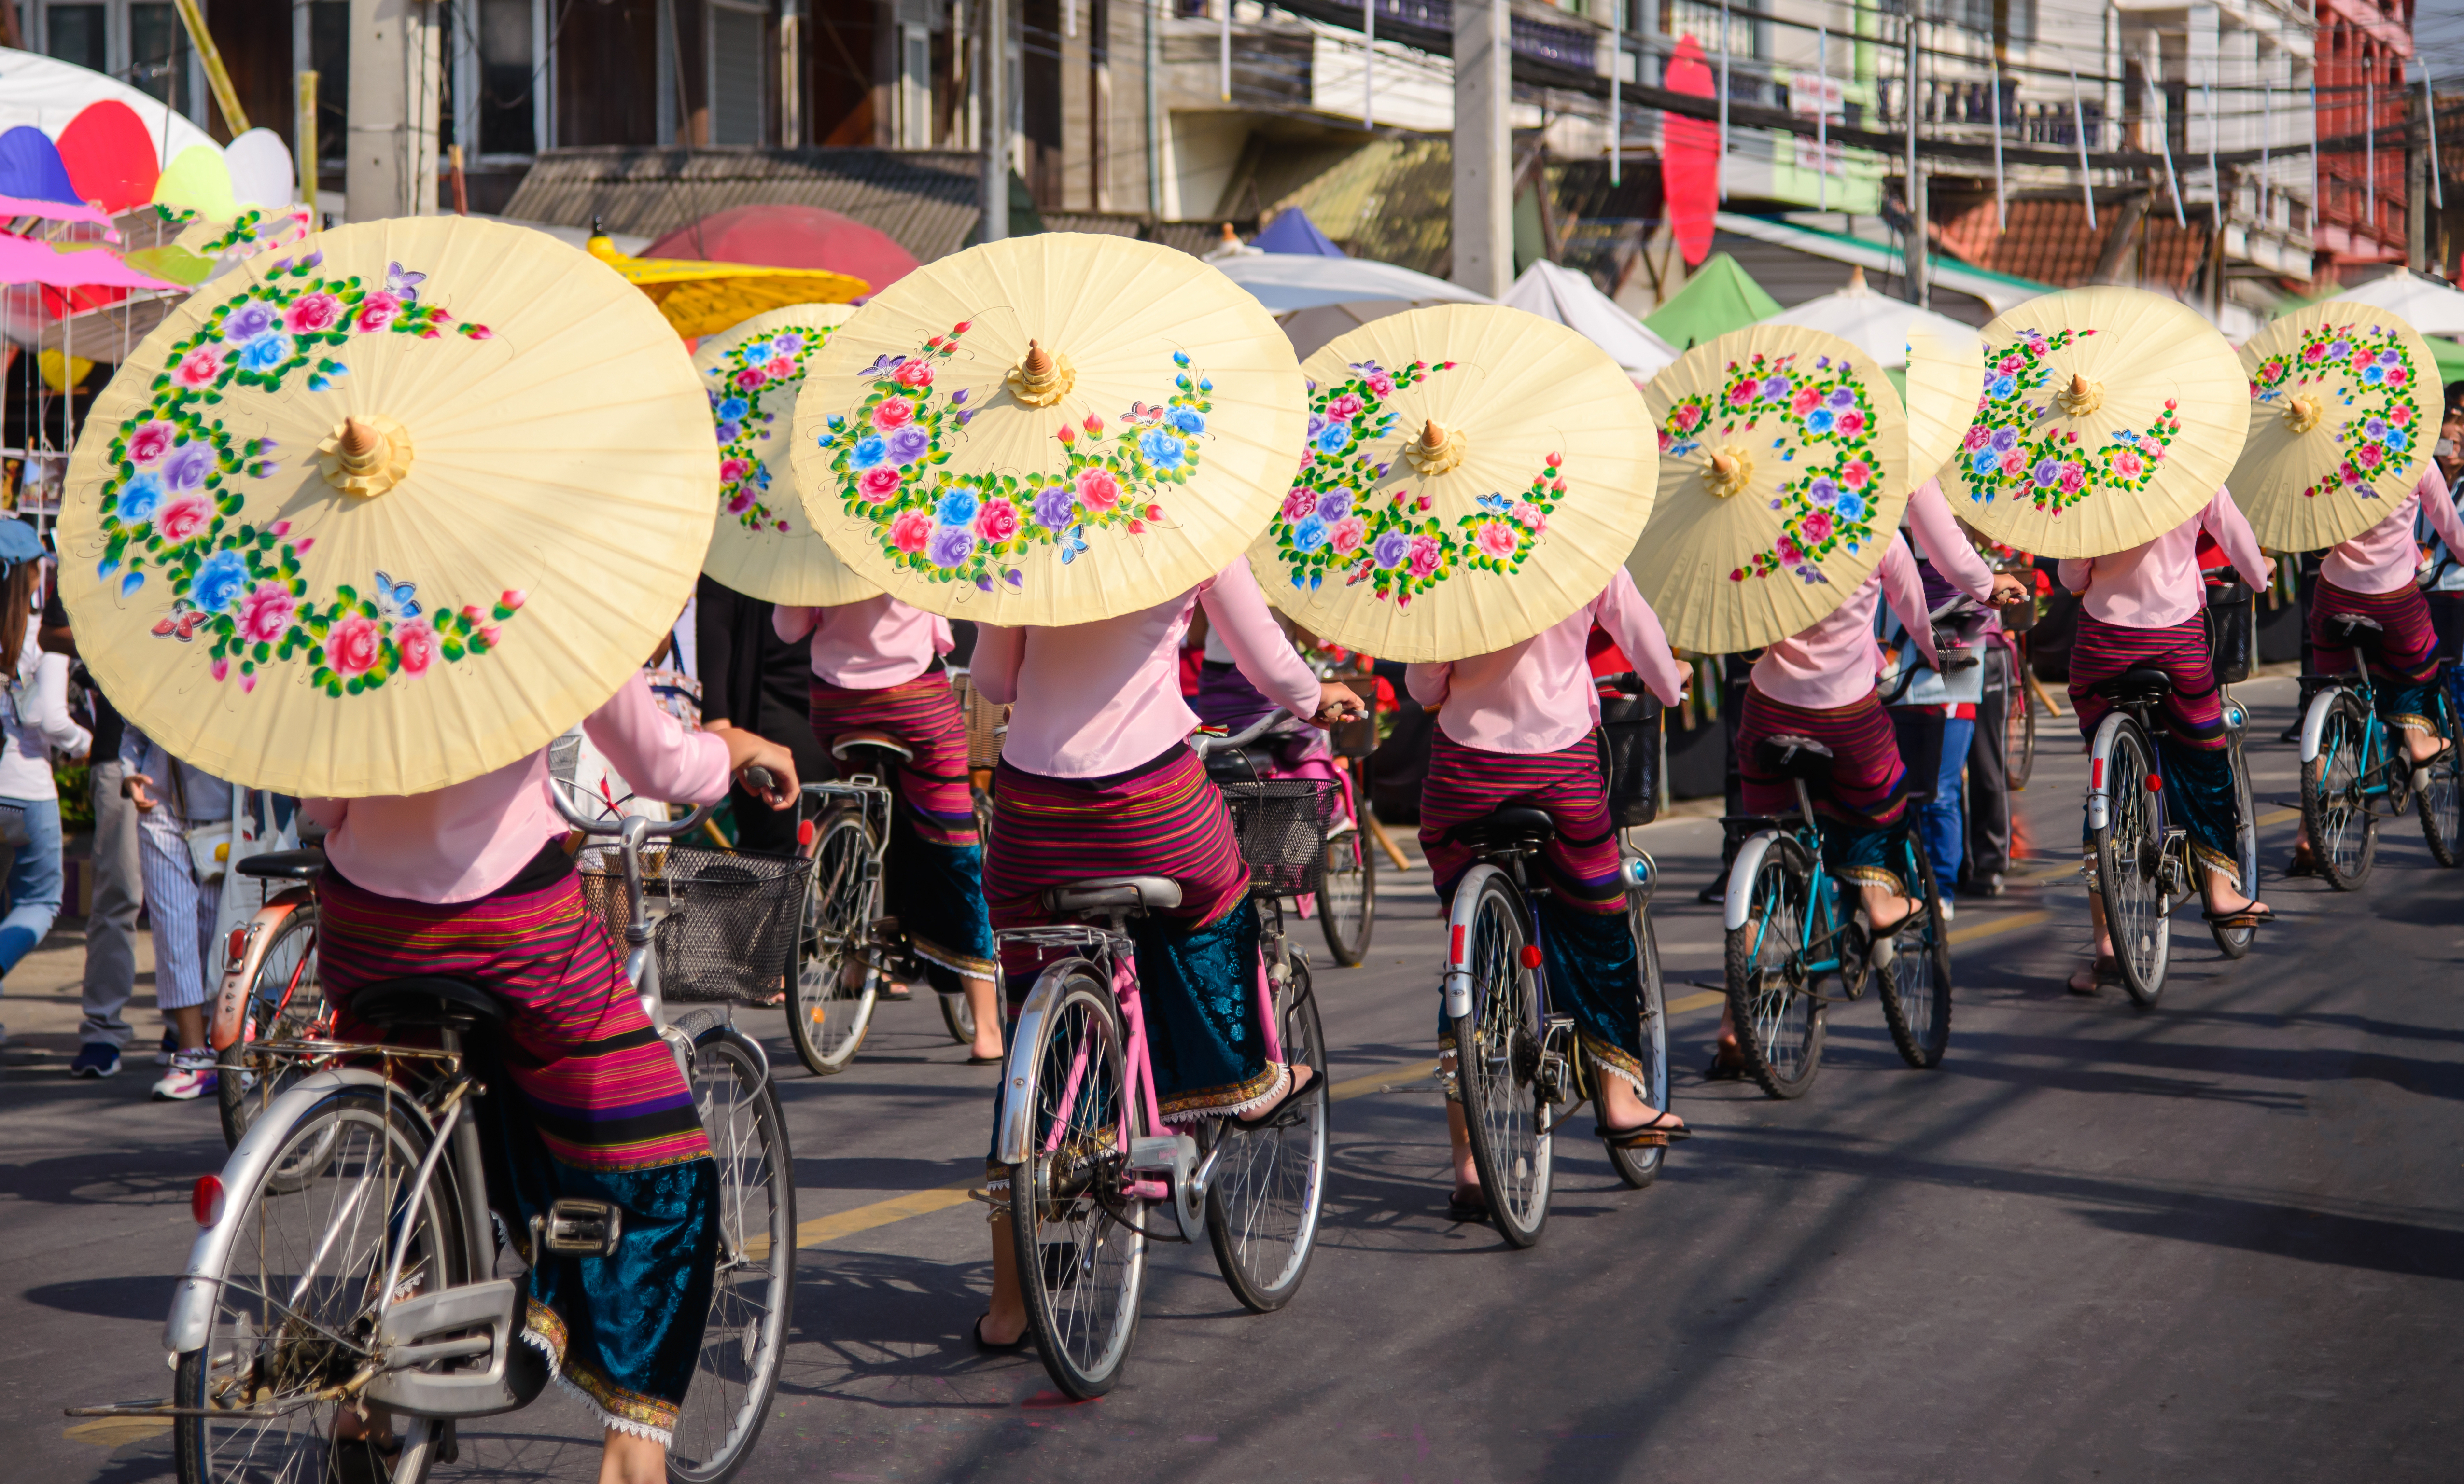 Women on bicycles holding umbrellas in Bo Sang, Chiang Mai